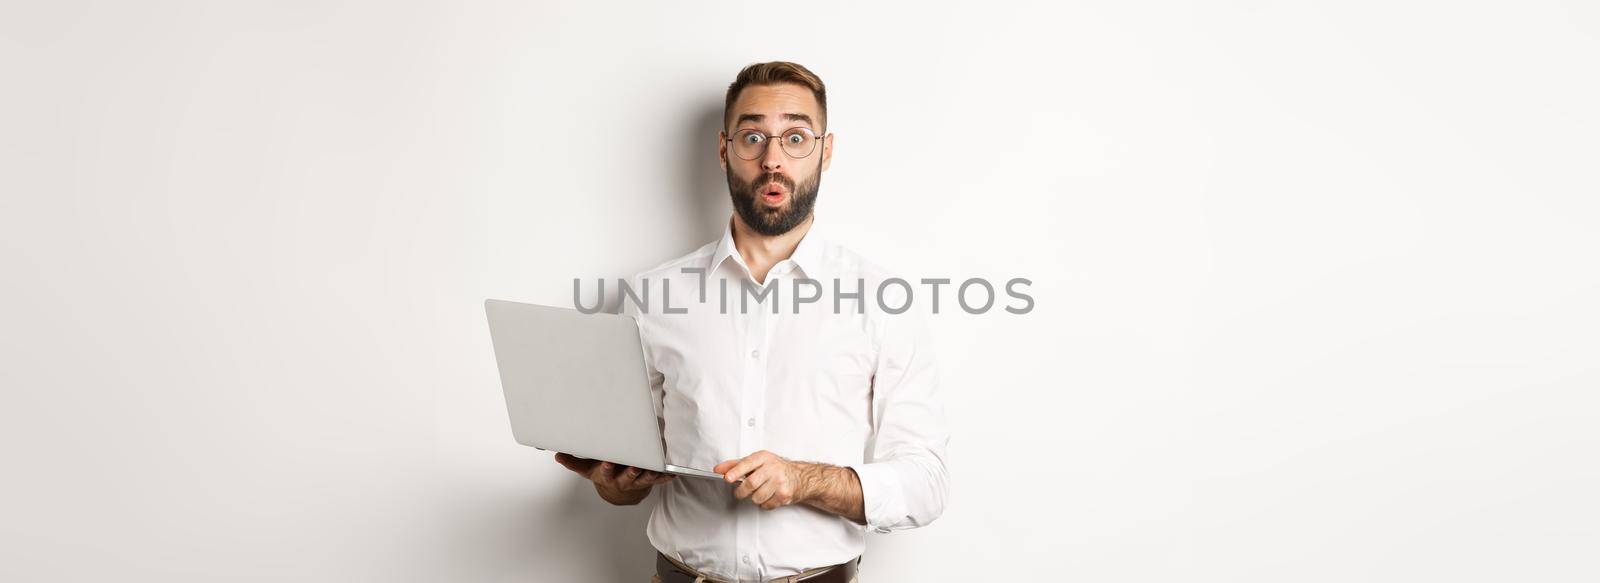 Business. Surprised business man holding laptop and looking interested, standing with computer against white background.